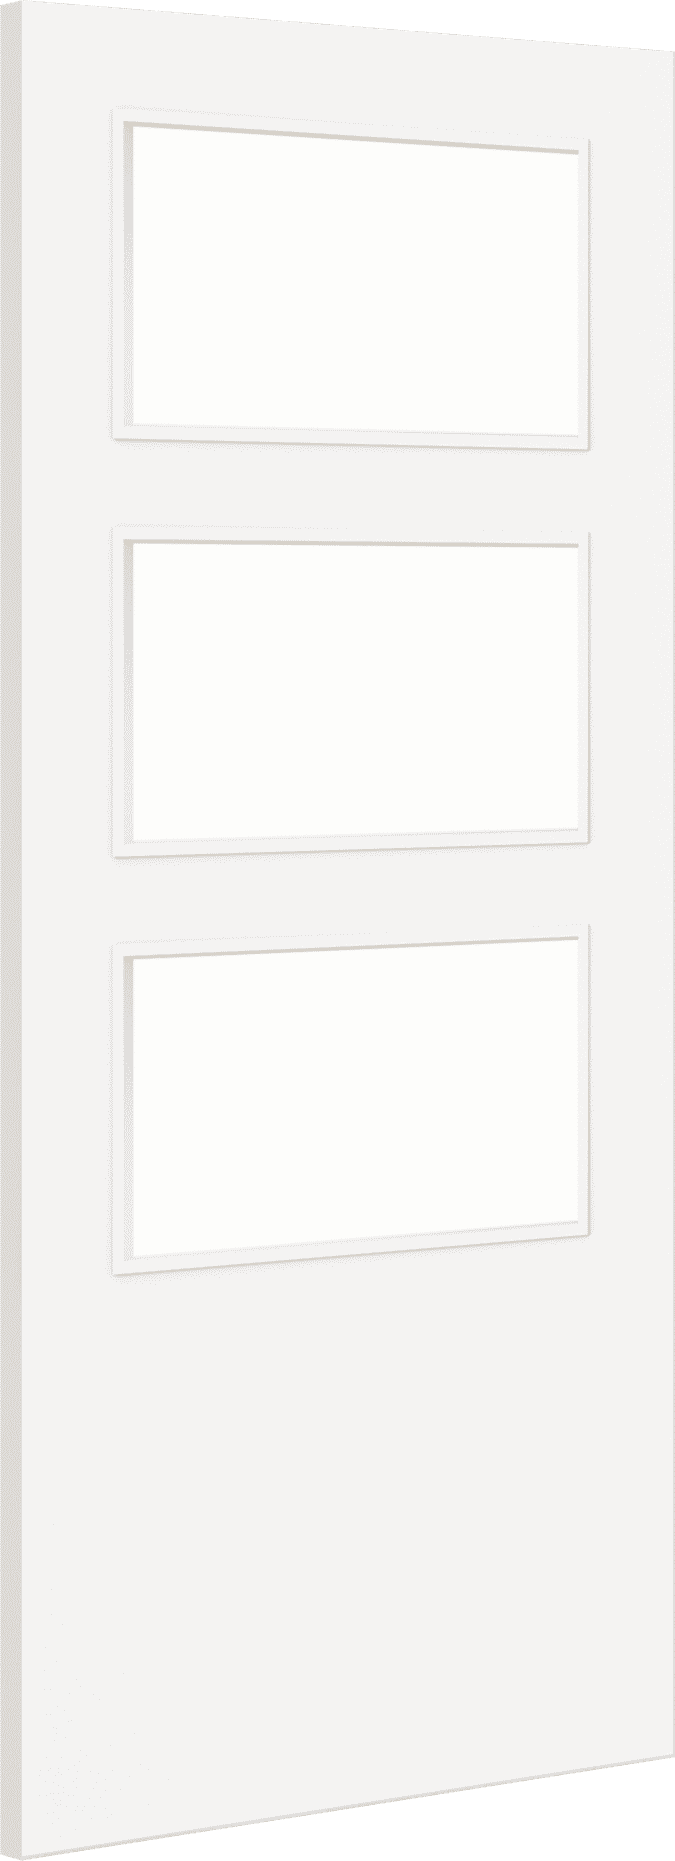 1981mm x 762mm x 44mm (30") Architectural Paint Grade White 03 Frosted Glazed Fire Door Blank